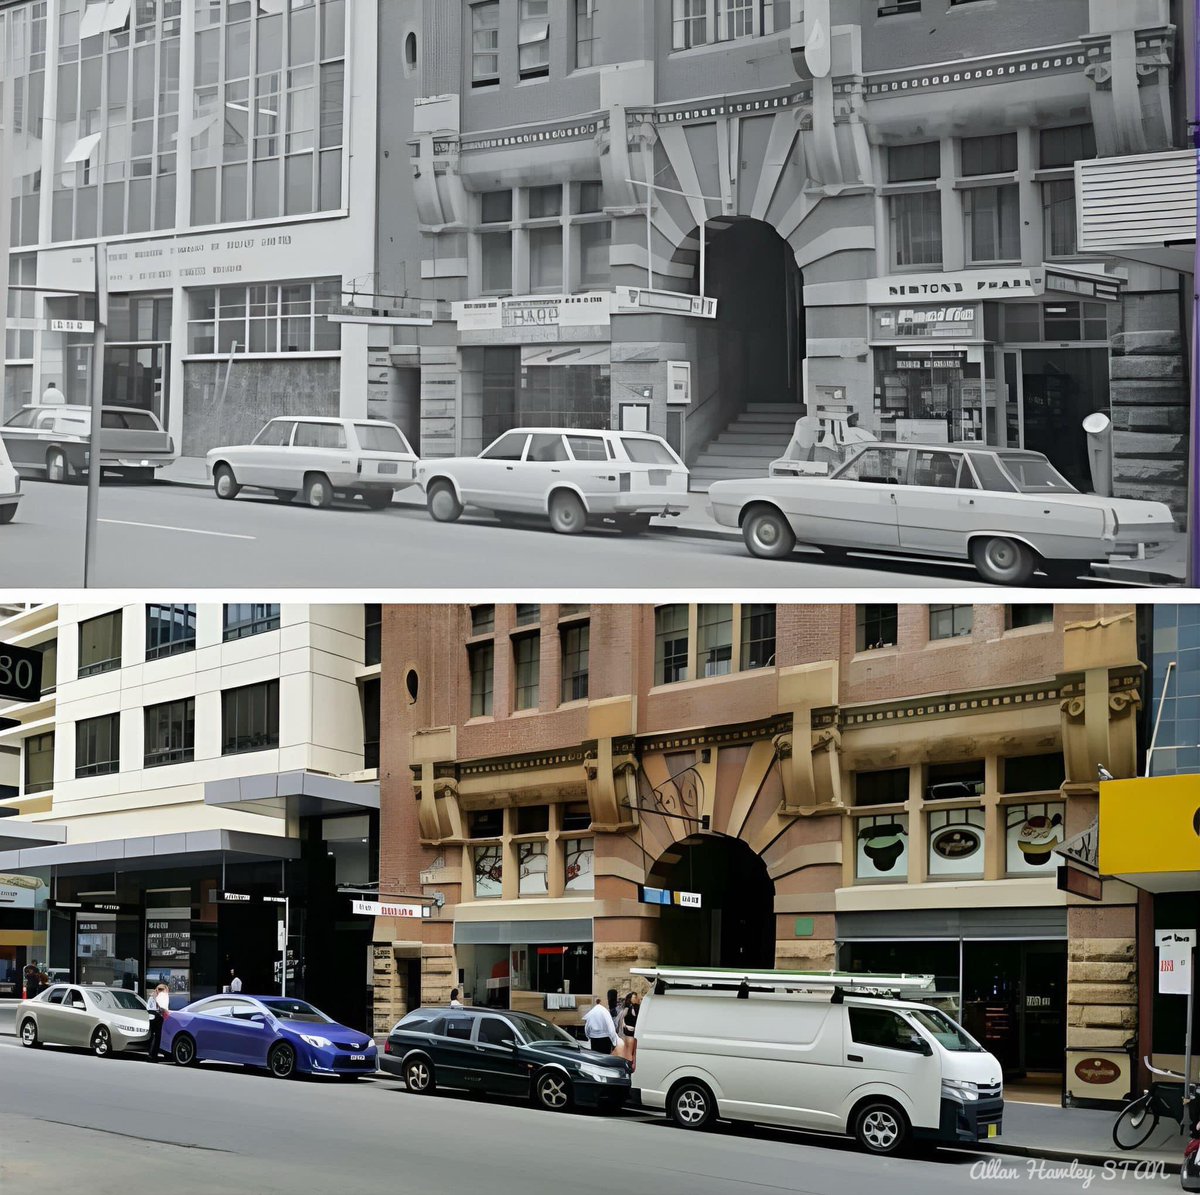 Blast from the STAN past Reverse parking 40 years on.. Looking west across Pitt St near Bathurst St 1976>2016. Courtesy-@cityofsydney and Allan Hawley.